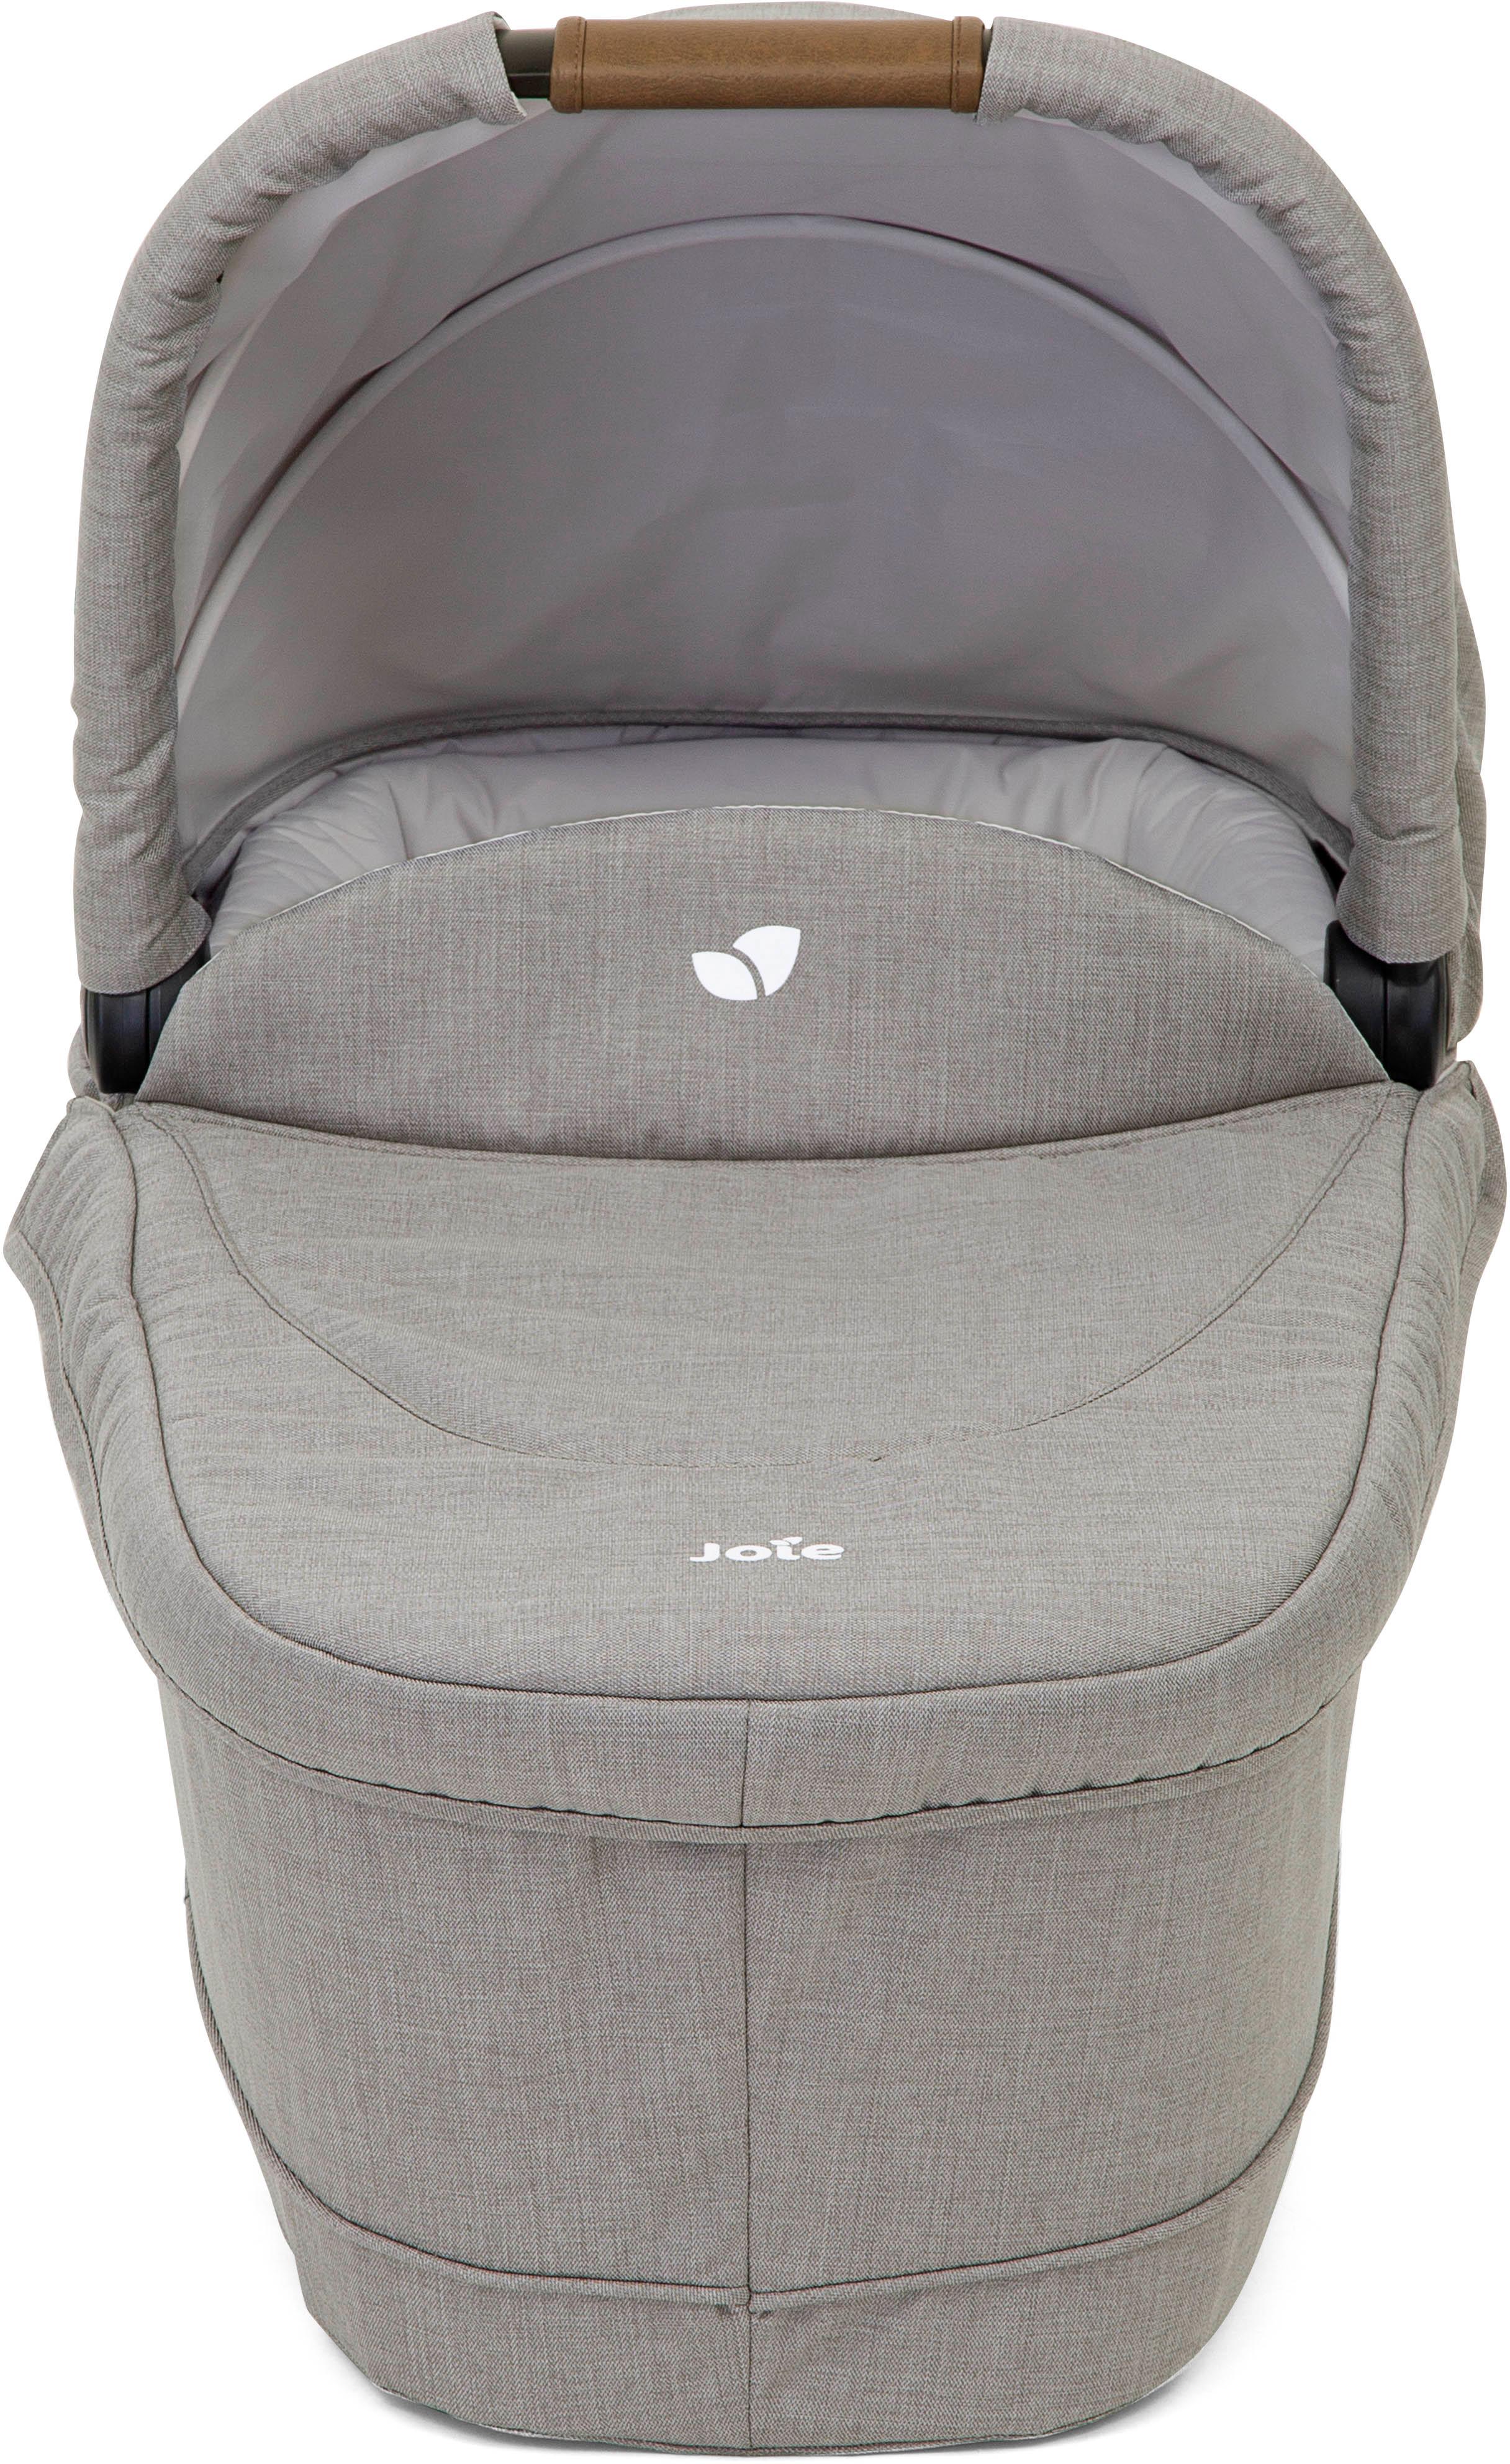 Joie Ramble Xl Carrycot - Grey Flannel